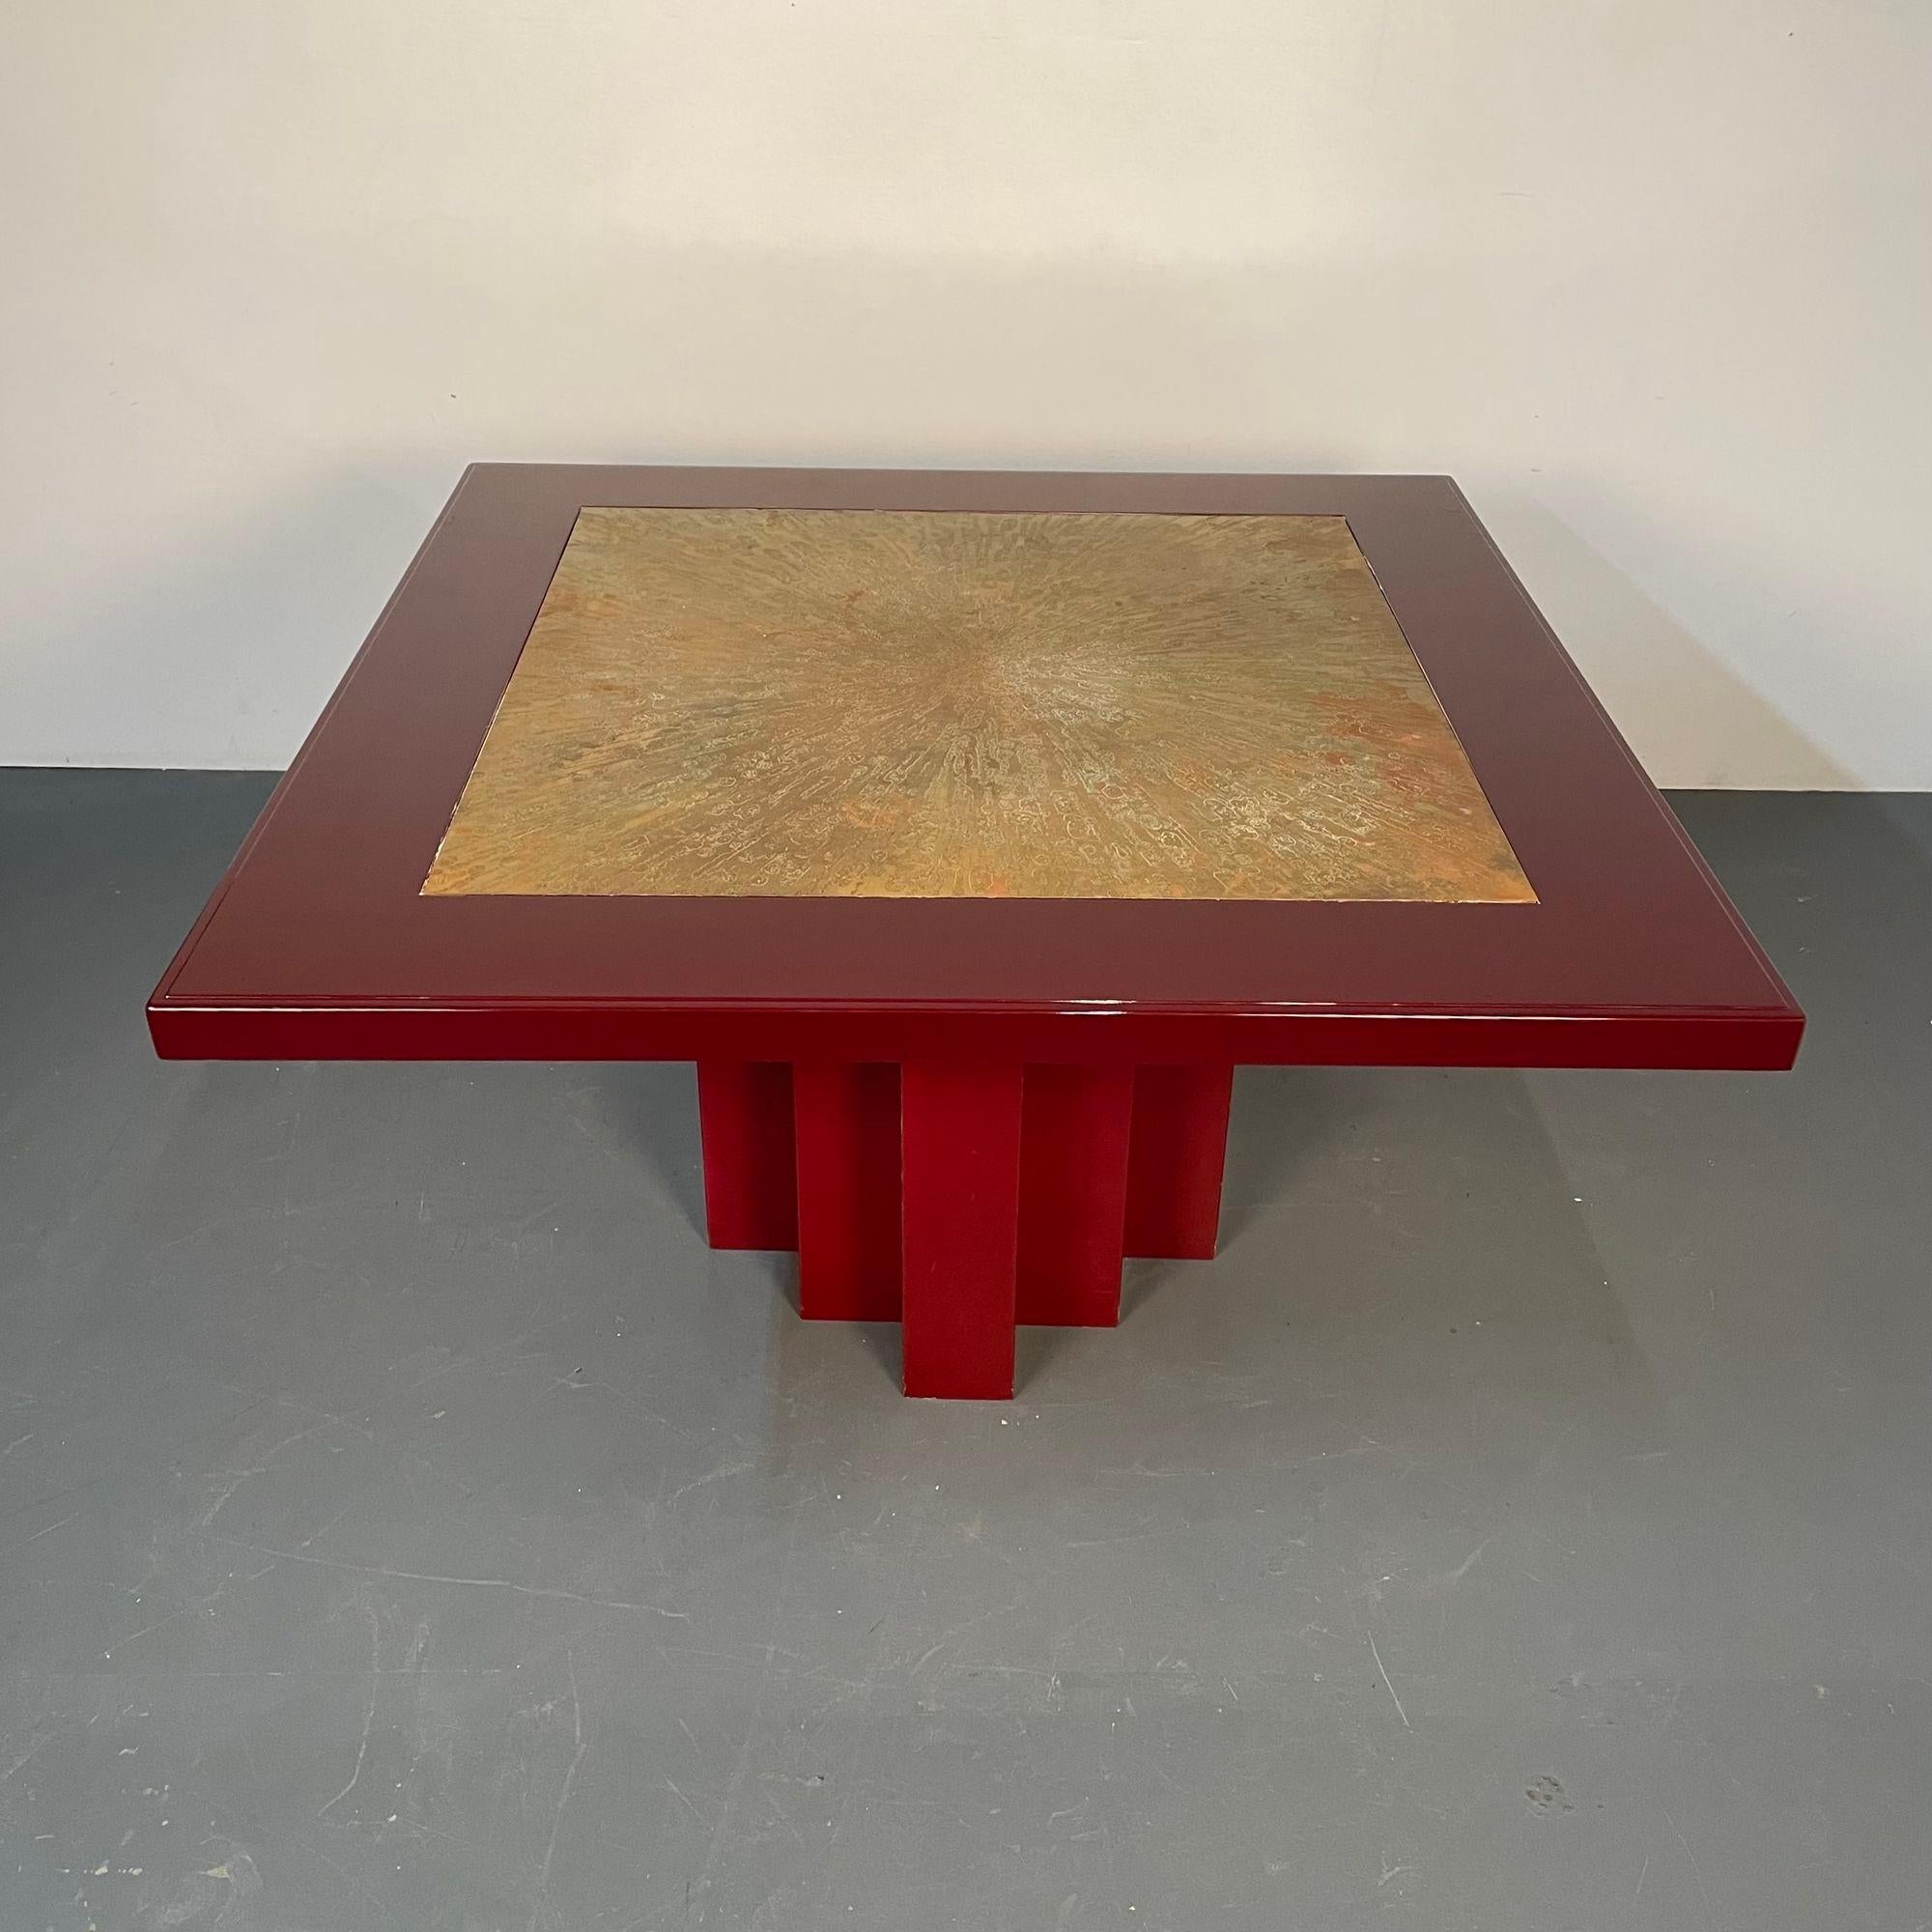 Georges Mathias Belgian Mid-Century Modern Dining, Card or Center Table, Lacquer, Signed
 
Mid-century coffee table by Belgian artist and designer, Georges Mathias (inscribed center). Having a wonderful modern Chinese motif deep red newly lacquered